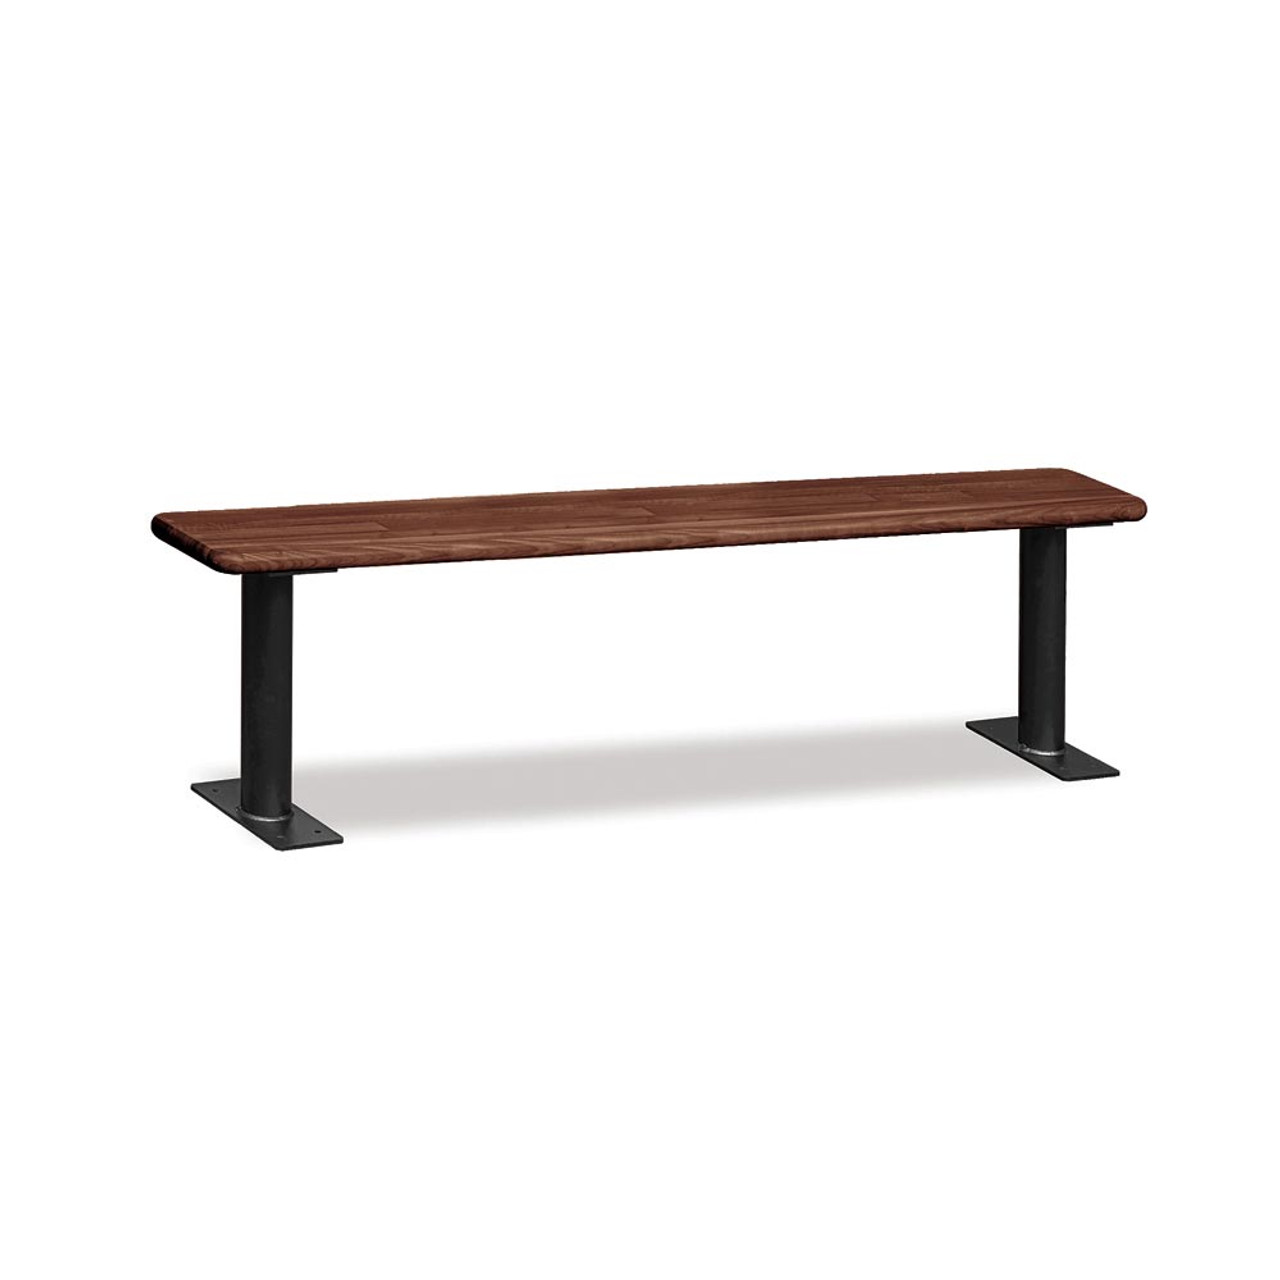 Rubber Block Bench 4 x 6 Square 1 Thick Base for Steel Block